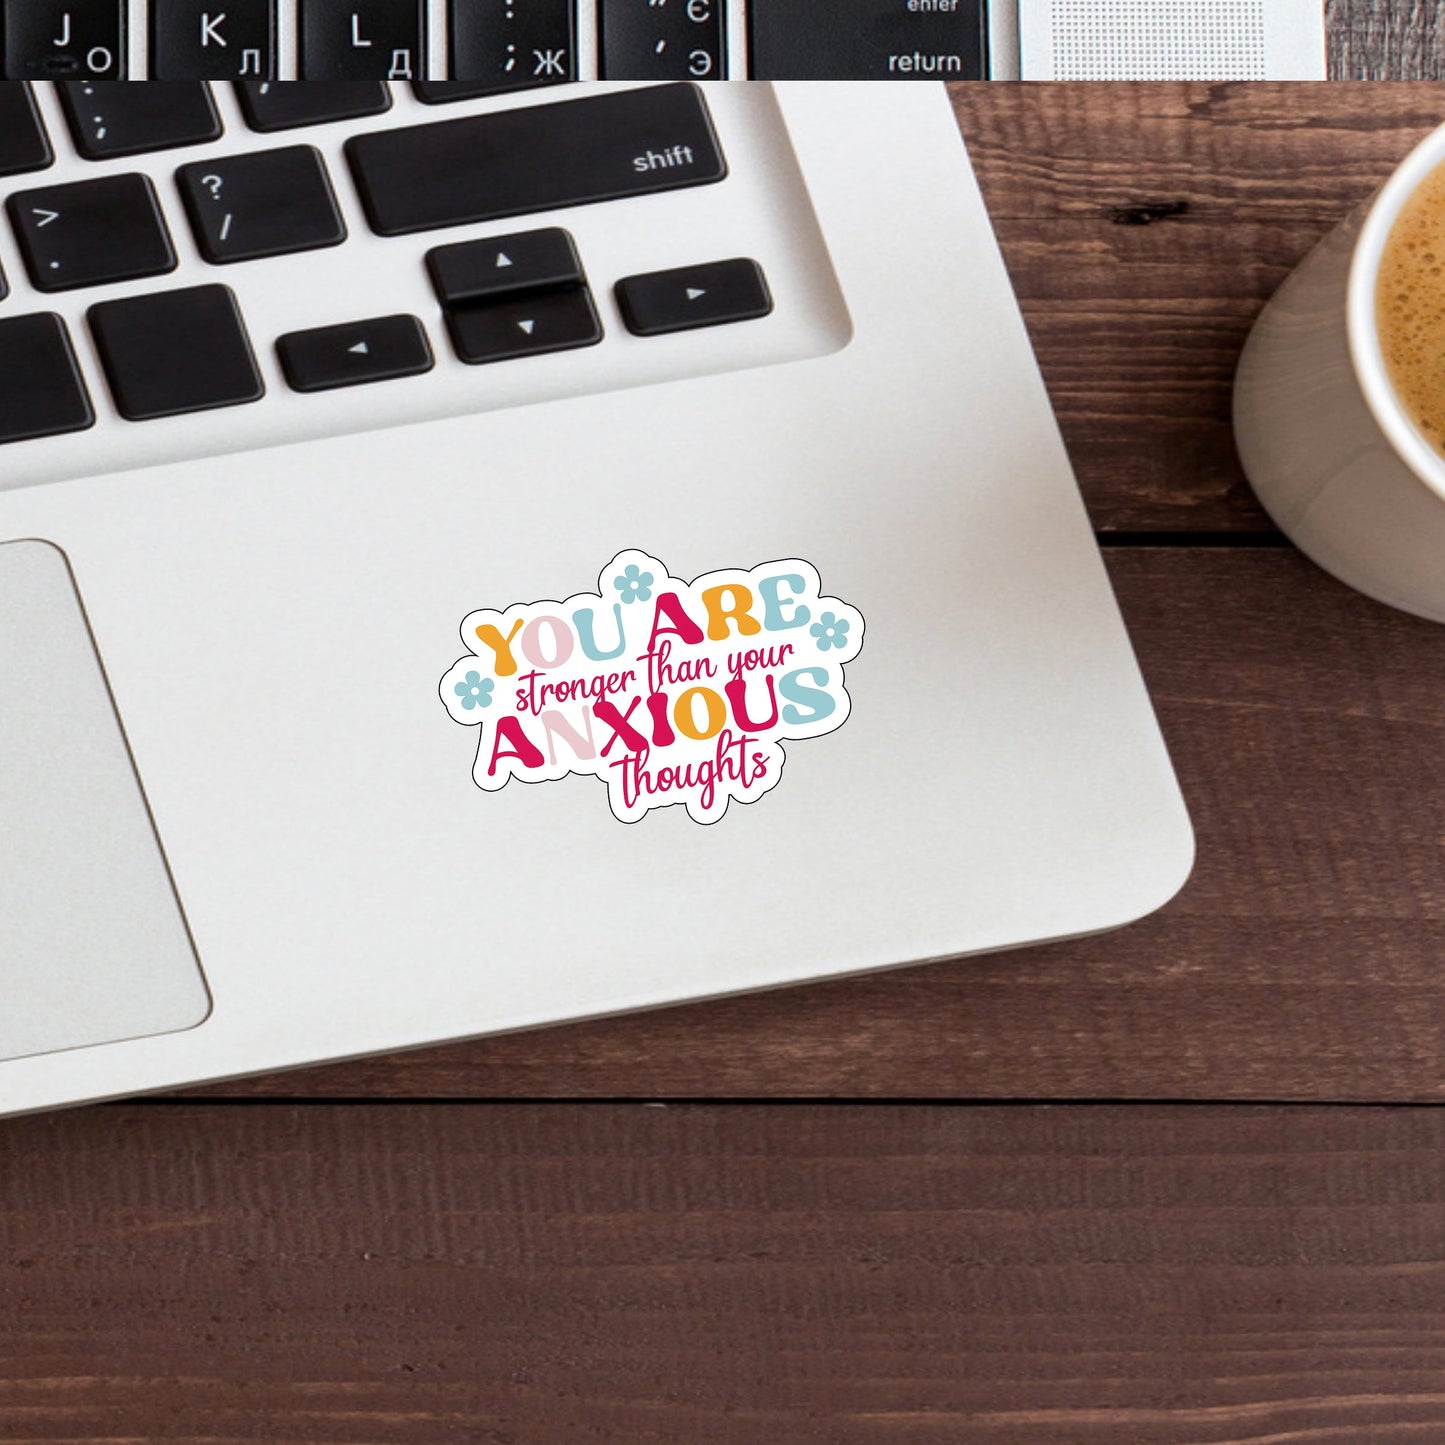 You are stronger than your anxious thoughts  Sticker,  Vinyl sticker, laptop sticker, Tablet sticker